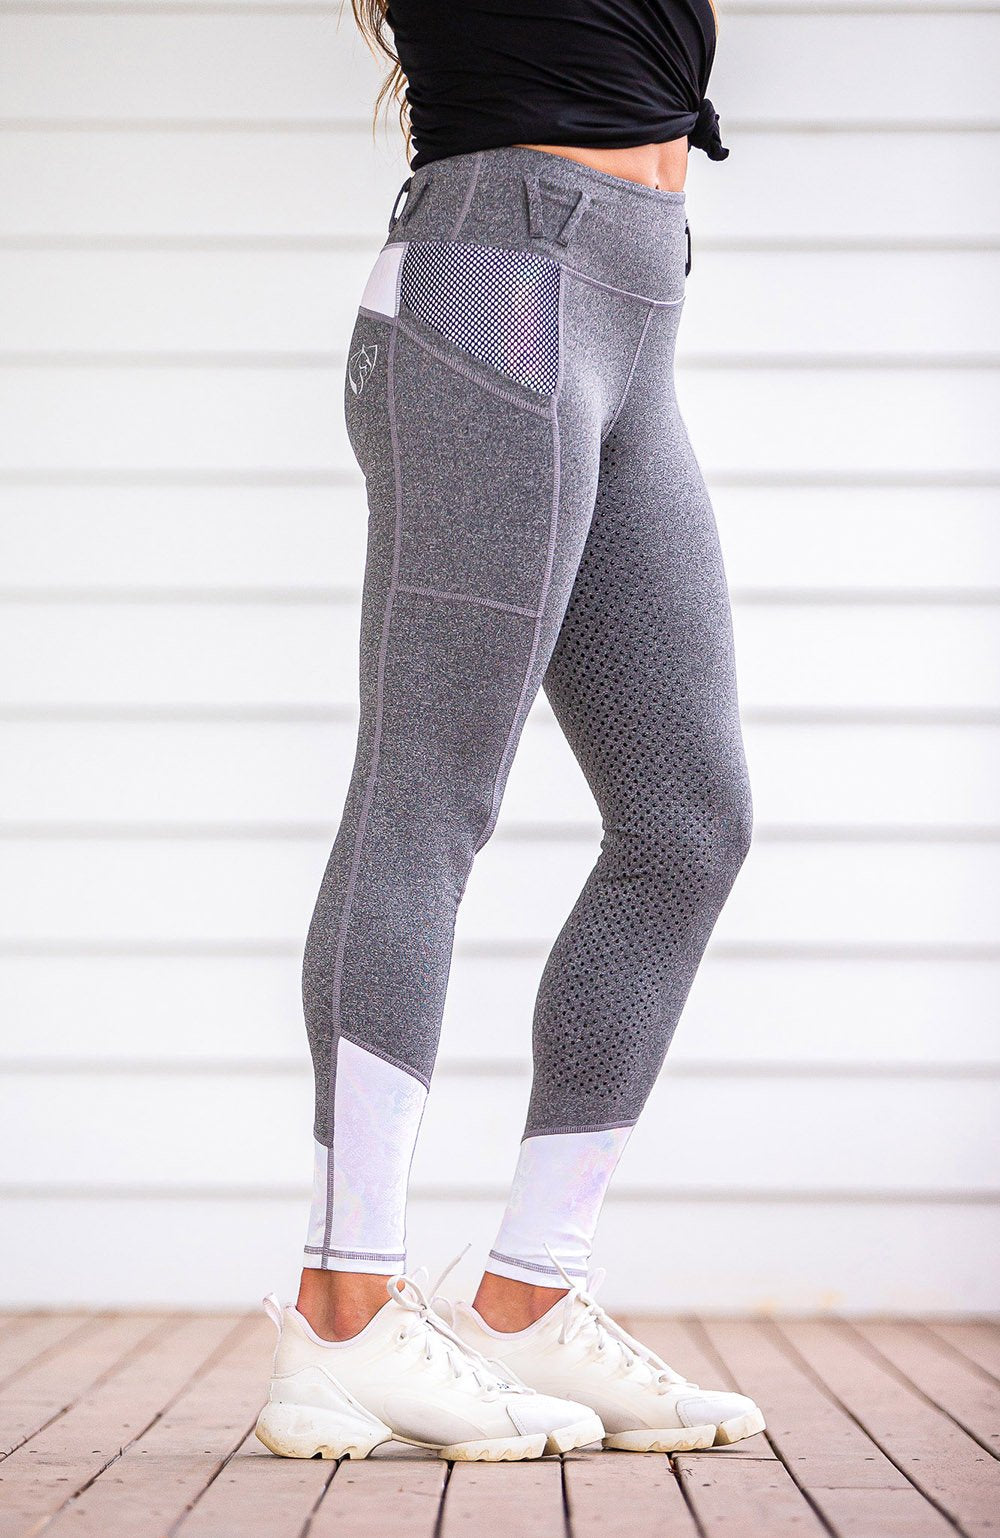 BARE Performance Riding Tights - Grey Unicorn (White Shimmer)